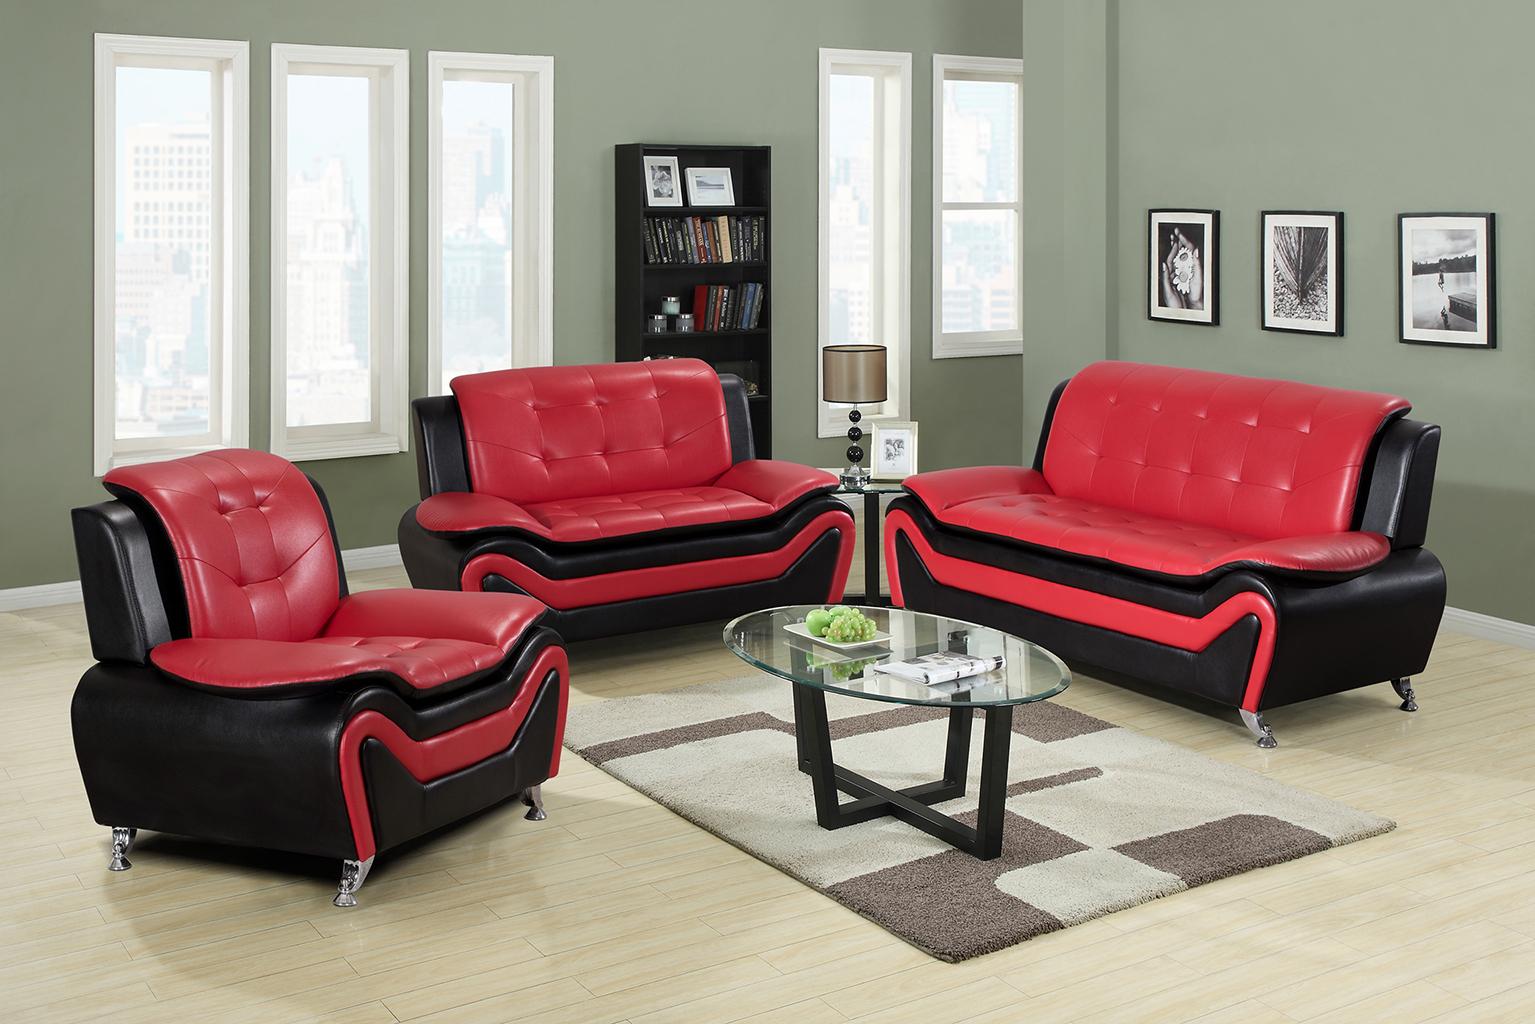 Contemporary, Modern Sofa and Loveseat Set HH8162 HH8162-Set-2 in Black, Red Polyurethane